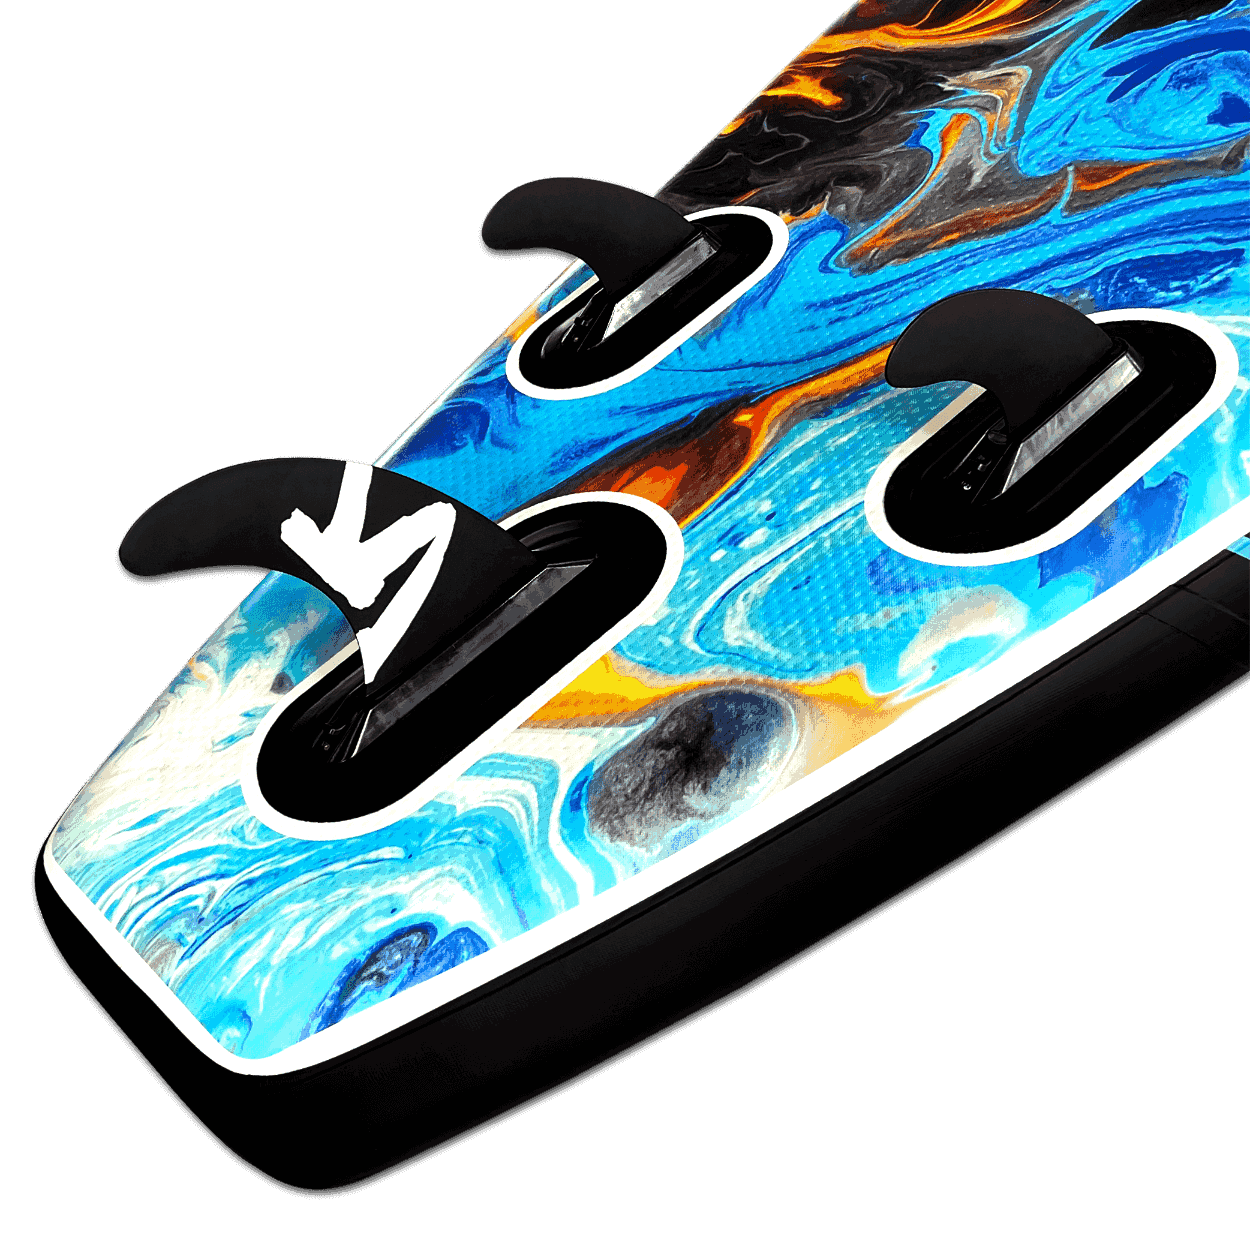 Tidal Rave™ ACRYLIC - 10’6 Inflatable Paddle Board ~ Fire & Ice